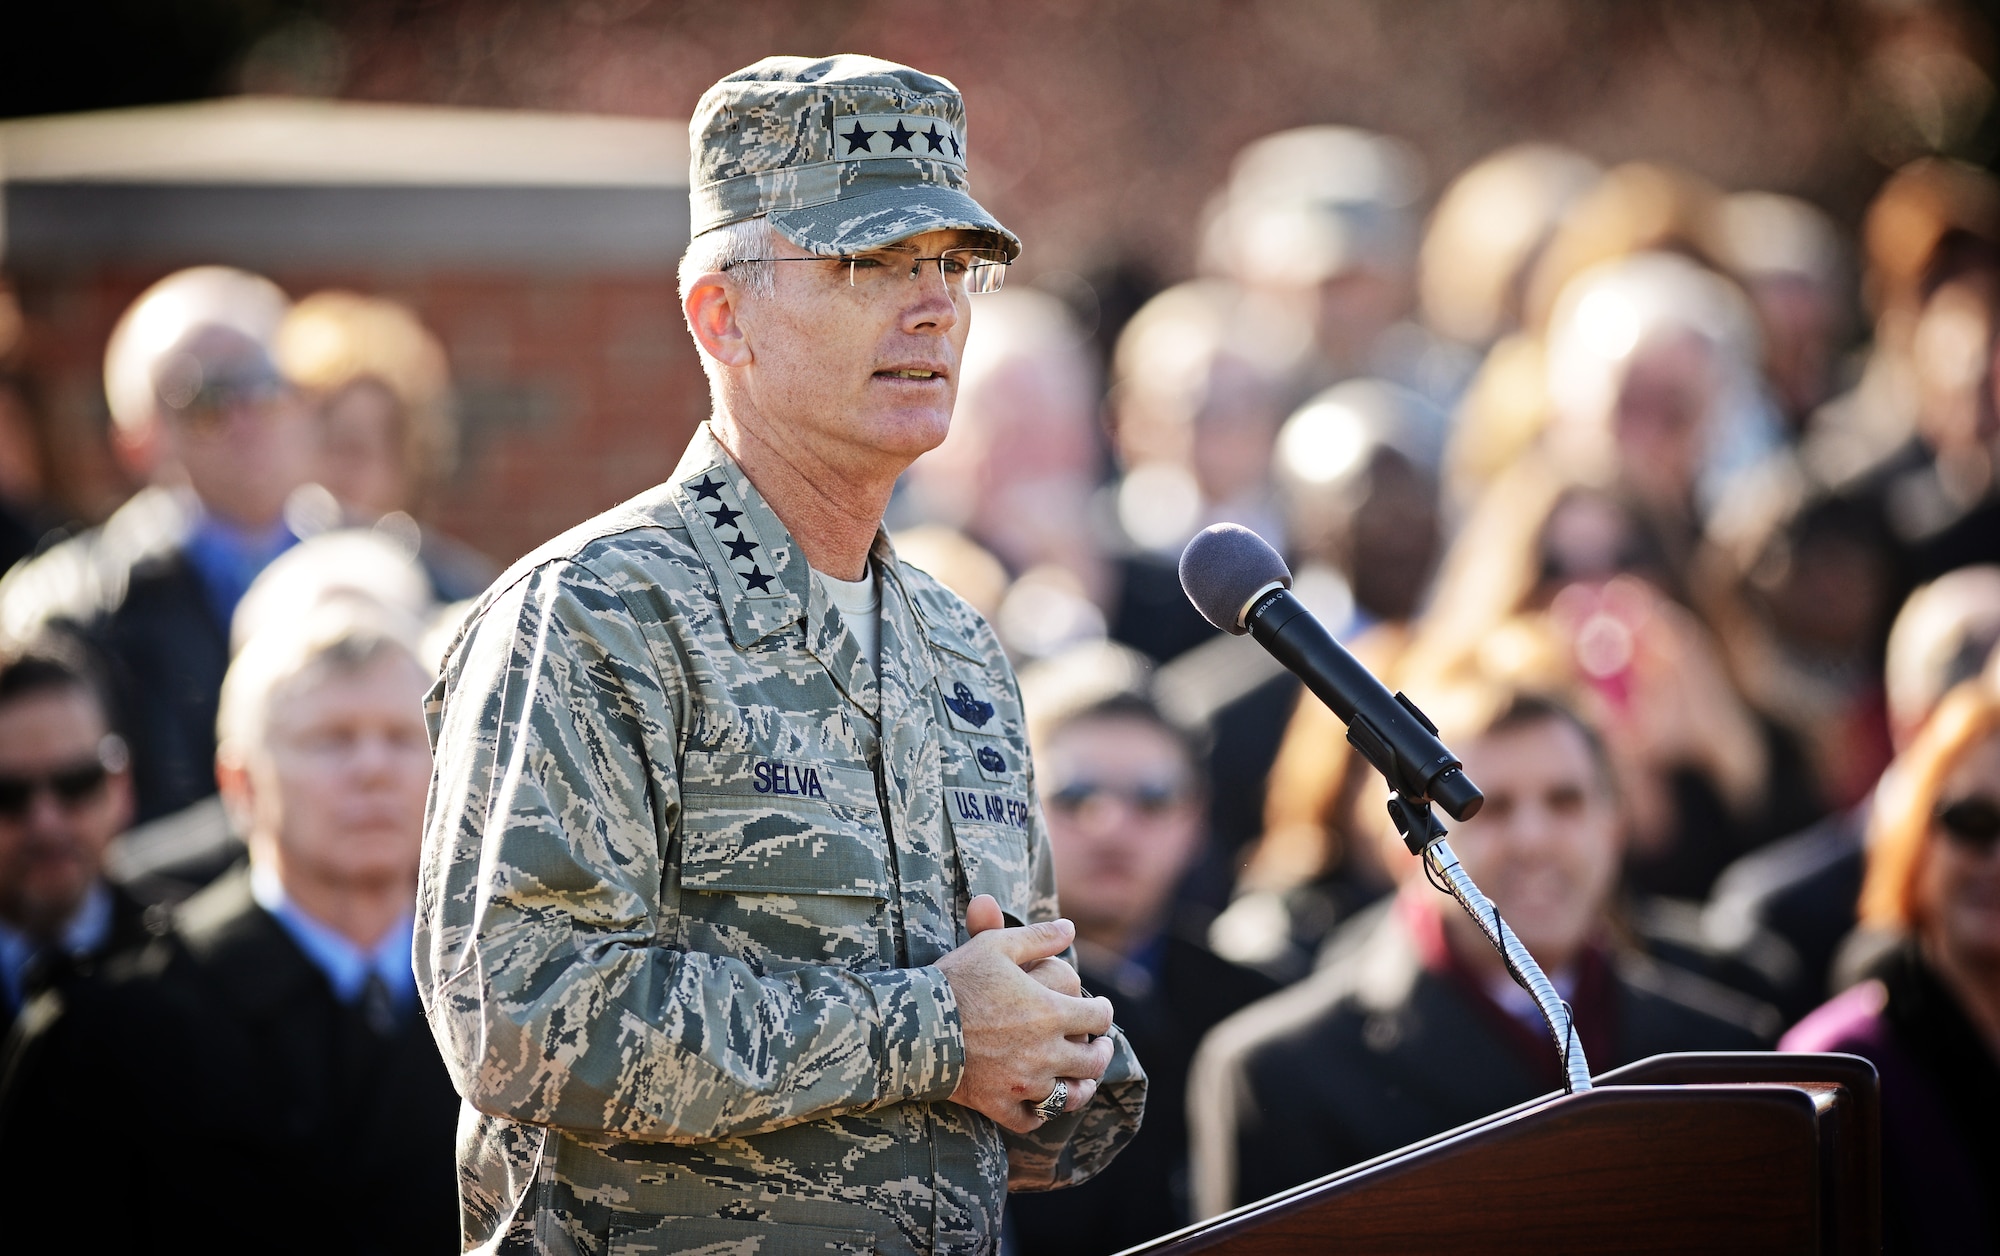 Gen. Paul J. Selva, Air Mobility Command commander, gives his incoming speech during the change of command ceremony at Scott Air Force Base, Ill., Nov. 30, 2012. Selva was previously assigned as the assistant to the Chairman of the Joint Chiefs of Staff in Washington D.C. The outgoing commander, Gen. Raymond E. Johns Jr. served 35 years in the Air Force, commanding more than 130,000 Airmen as well as reaching 4,500 flight hours in various aircraft. (U.S. Air Force photo/Staff Sgt. Ryan Crane)